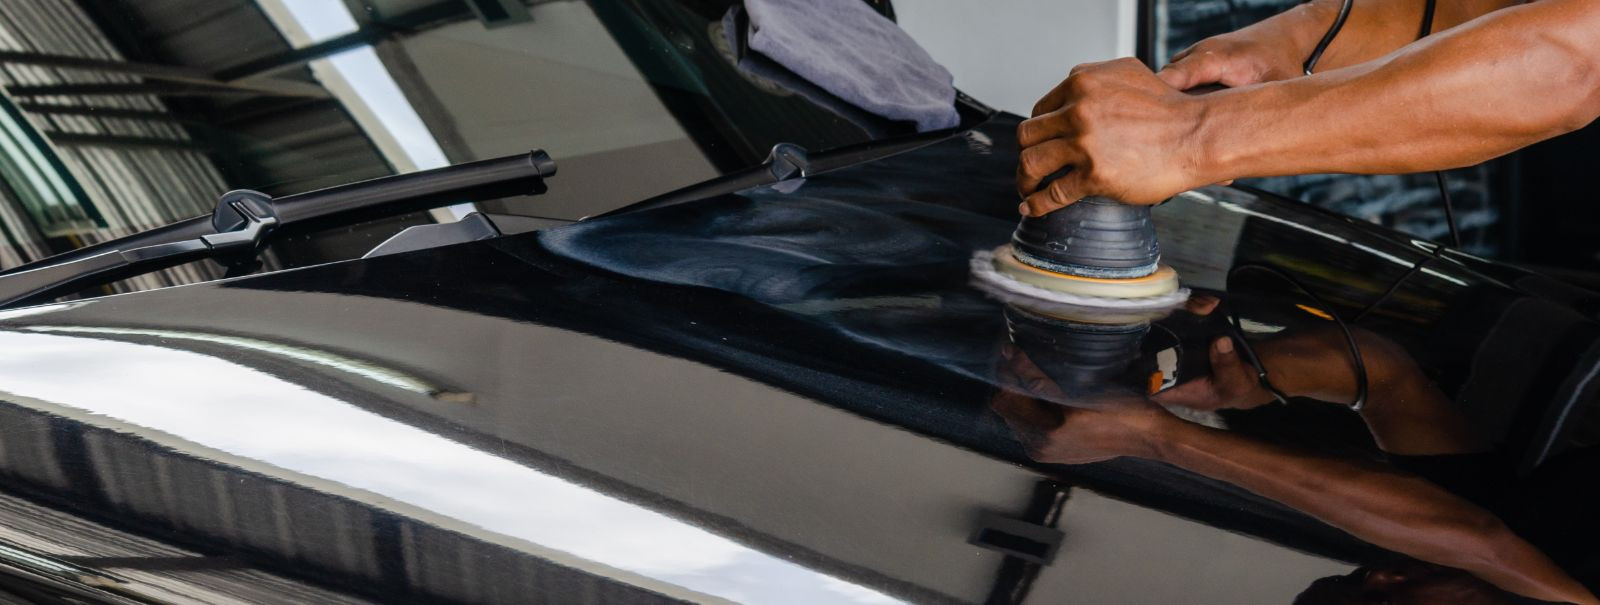 Ceramic wax is a cutting-edge product in the world of car care that combines the benefits of traditional carnauba wax with advanced nanotechnology. This hybrid 